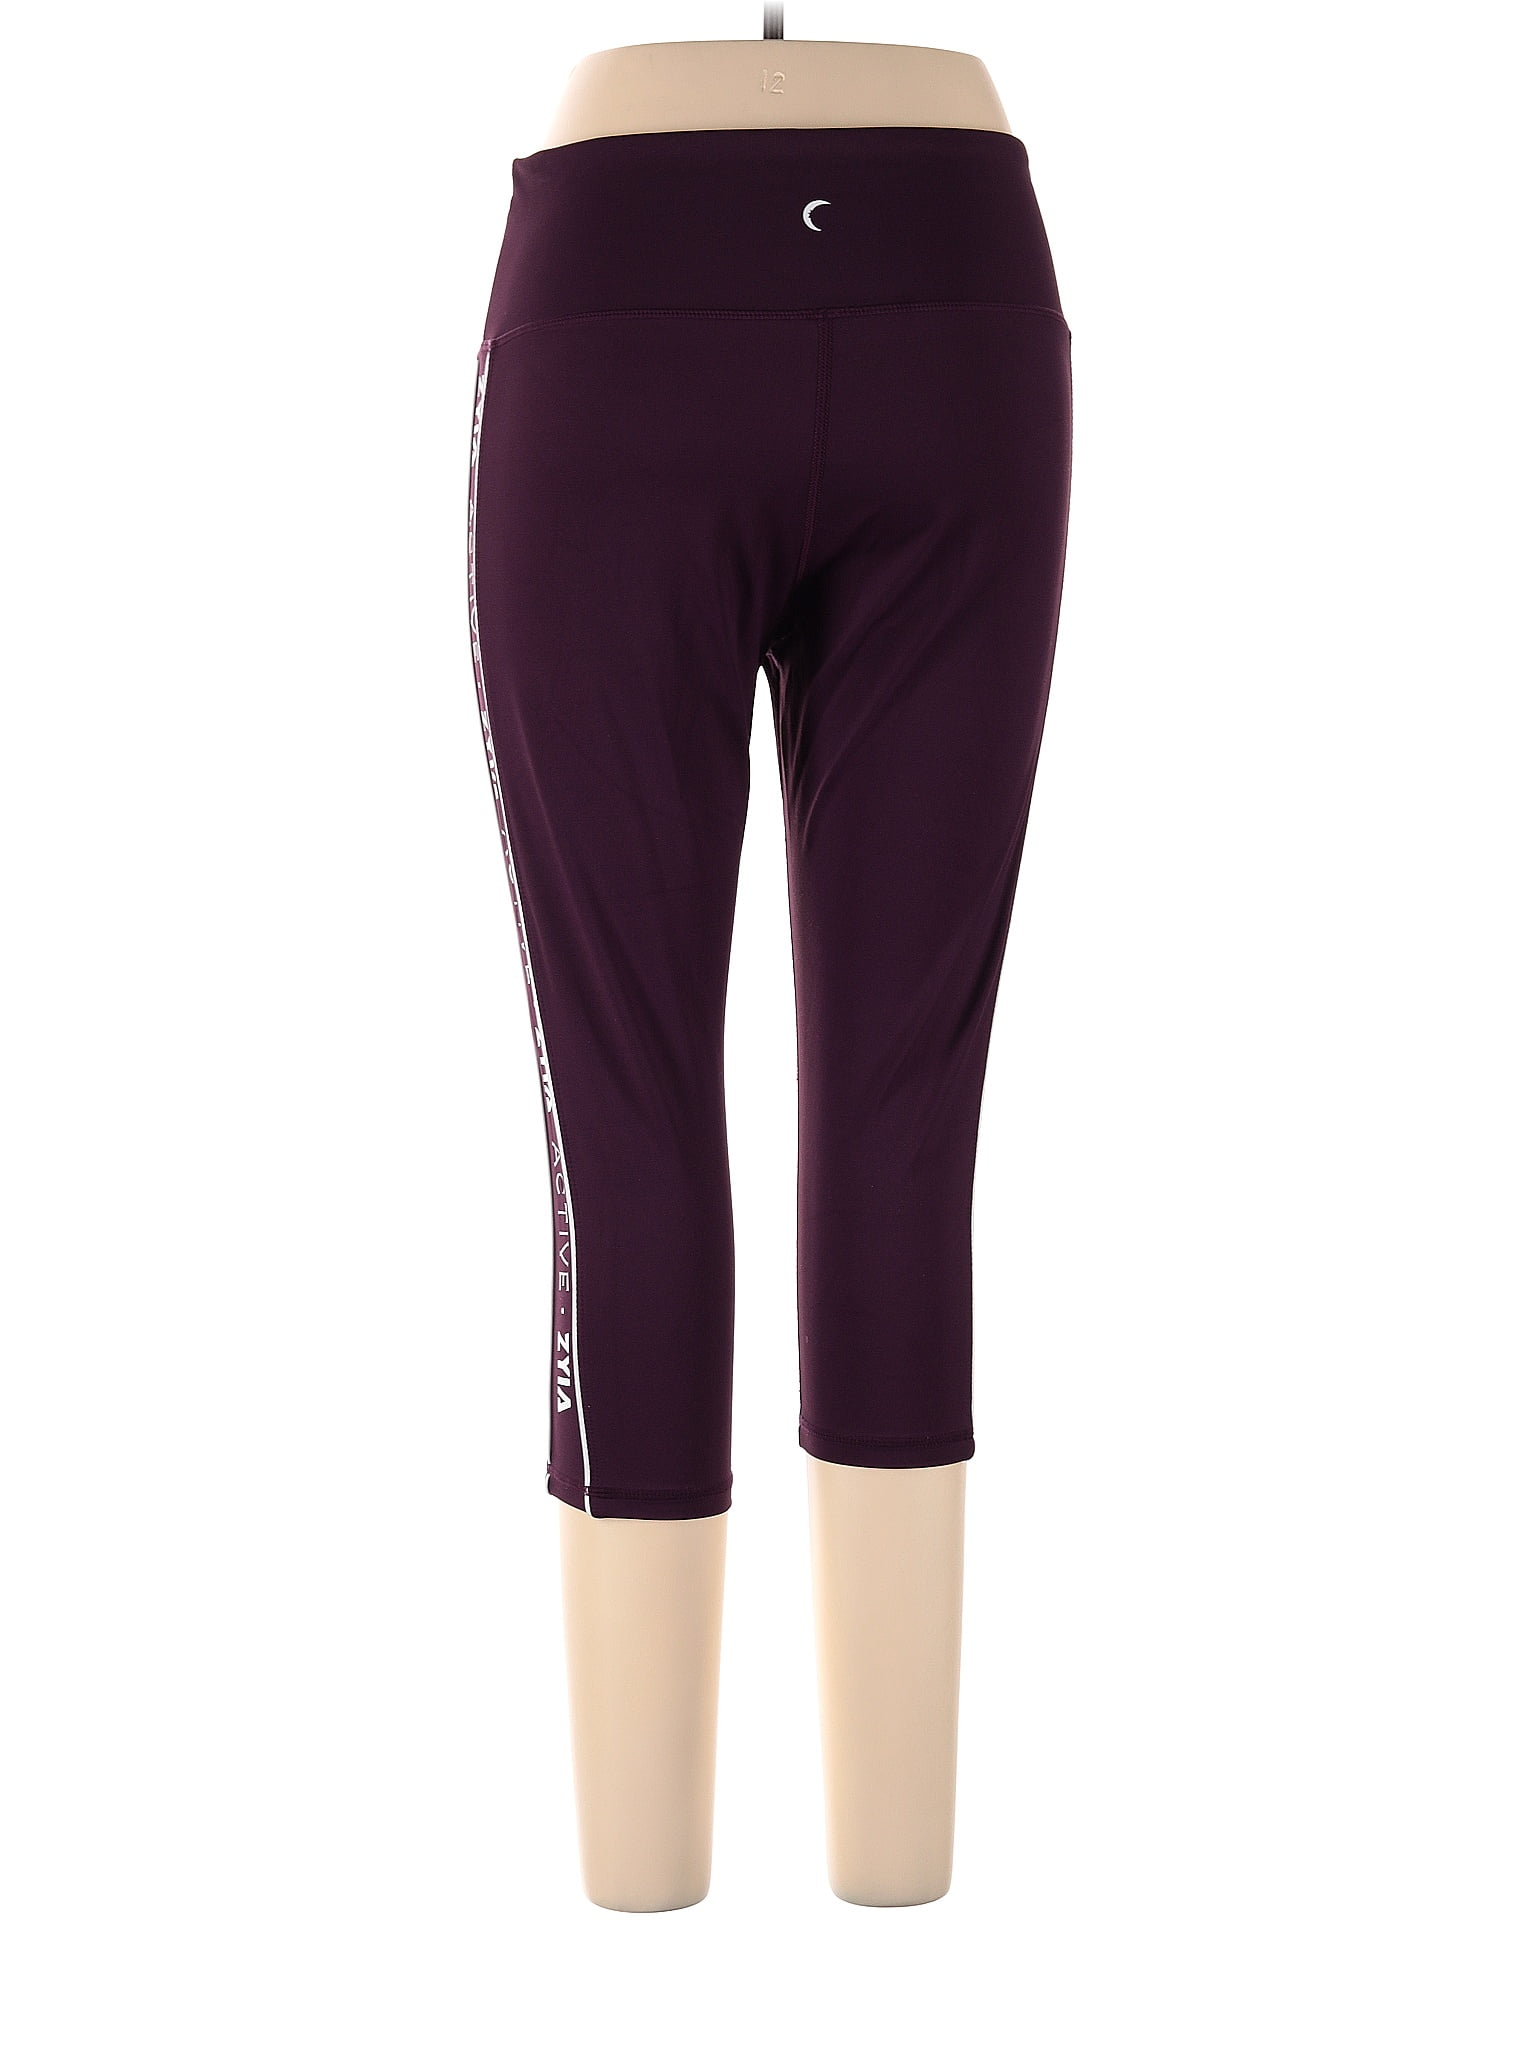 Zyia Active Pink Leggings Size 14 - 16 - 52% off